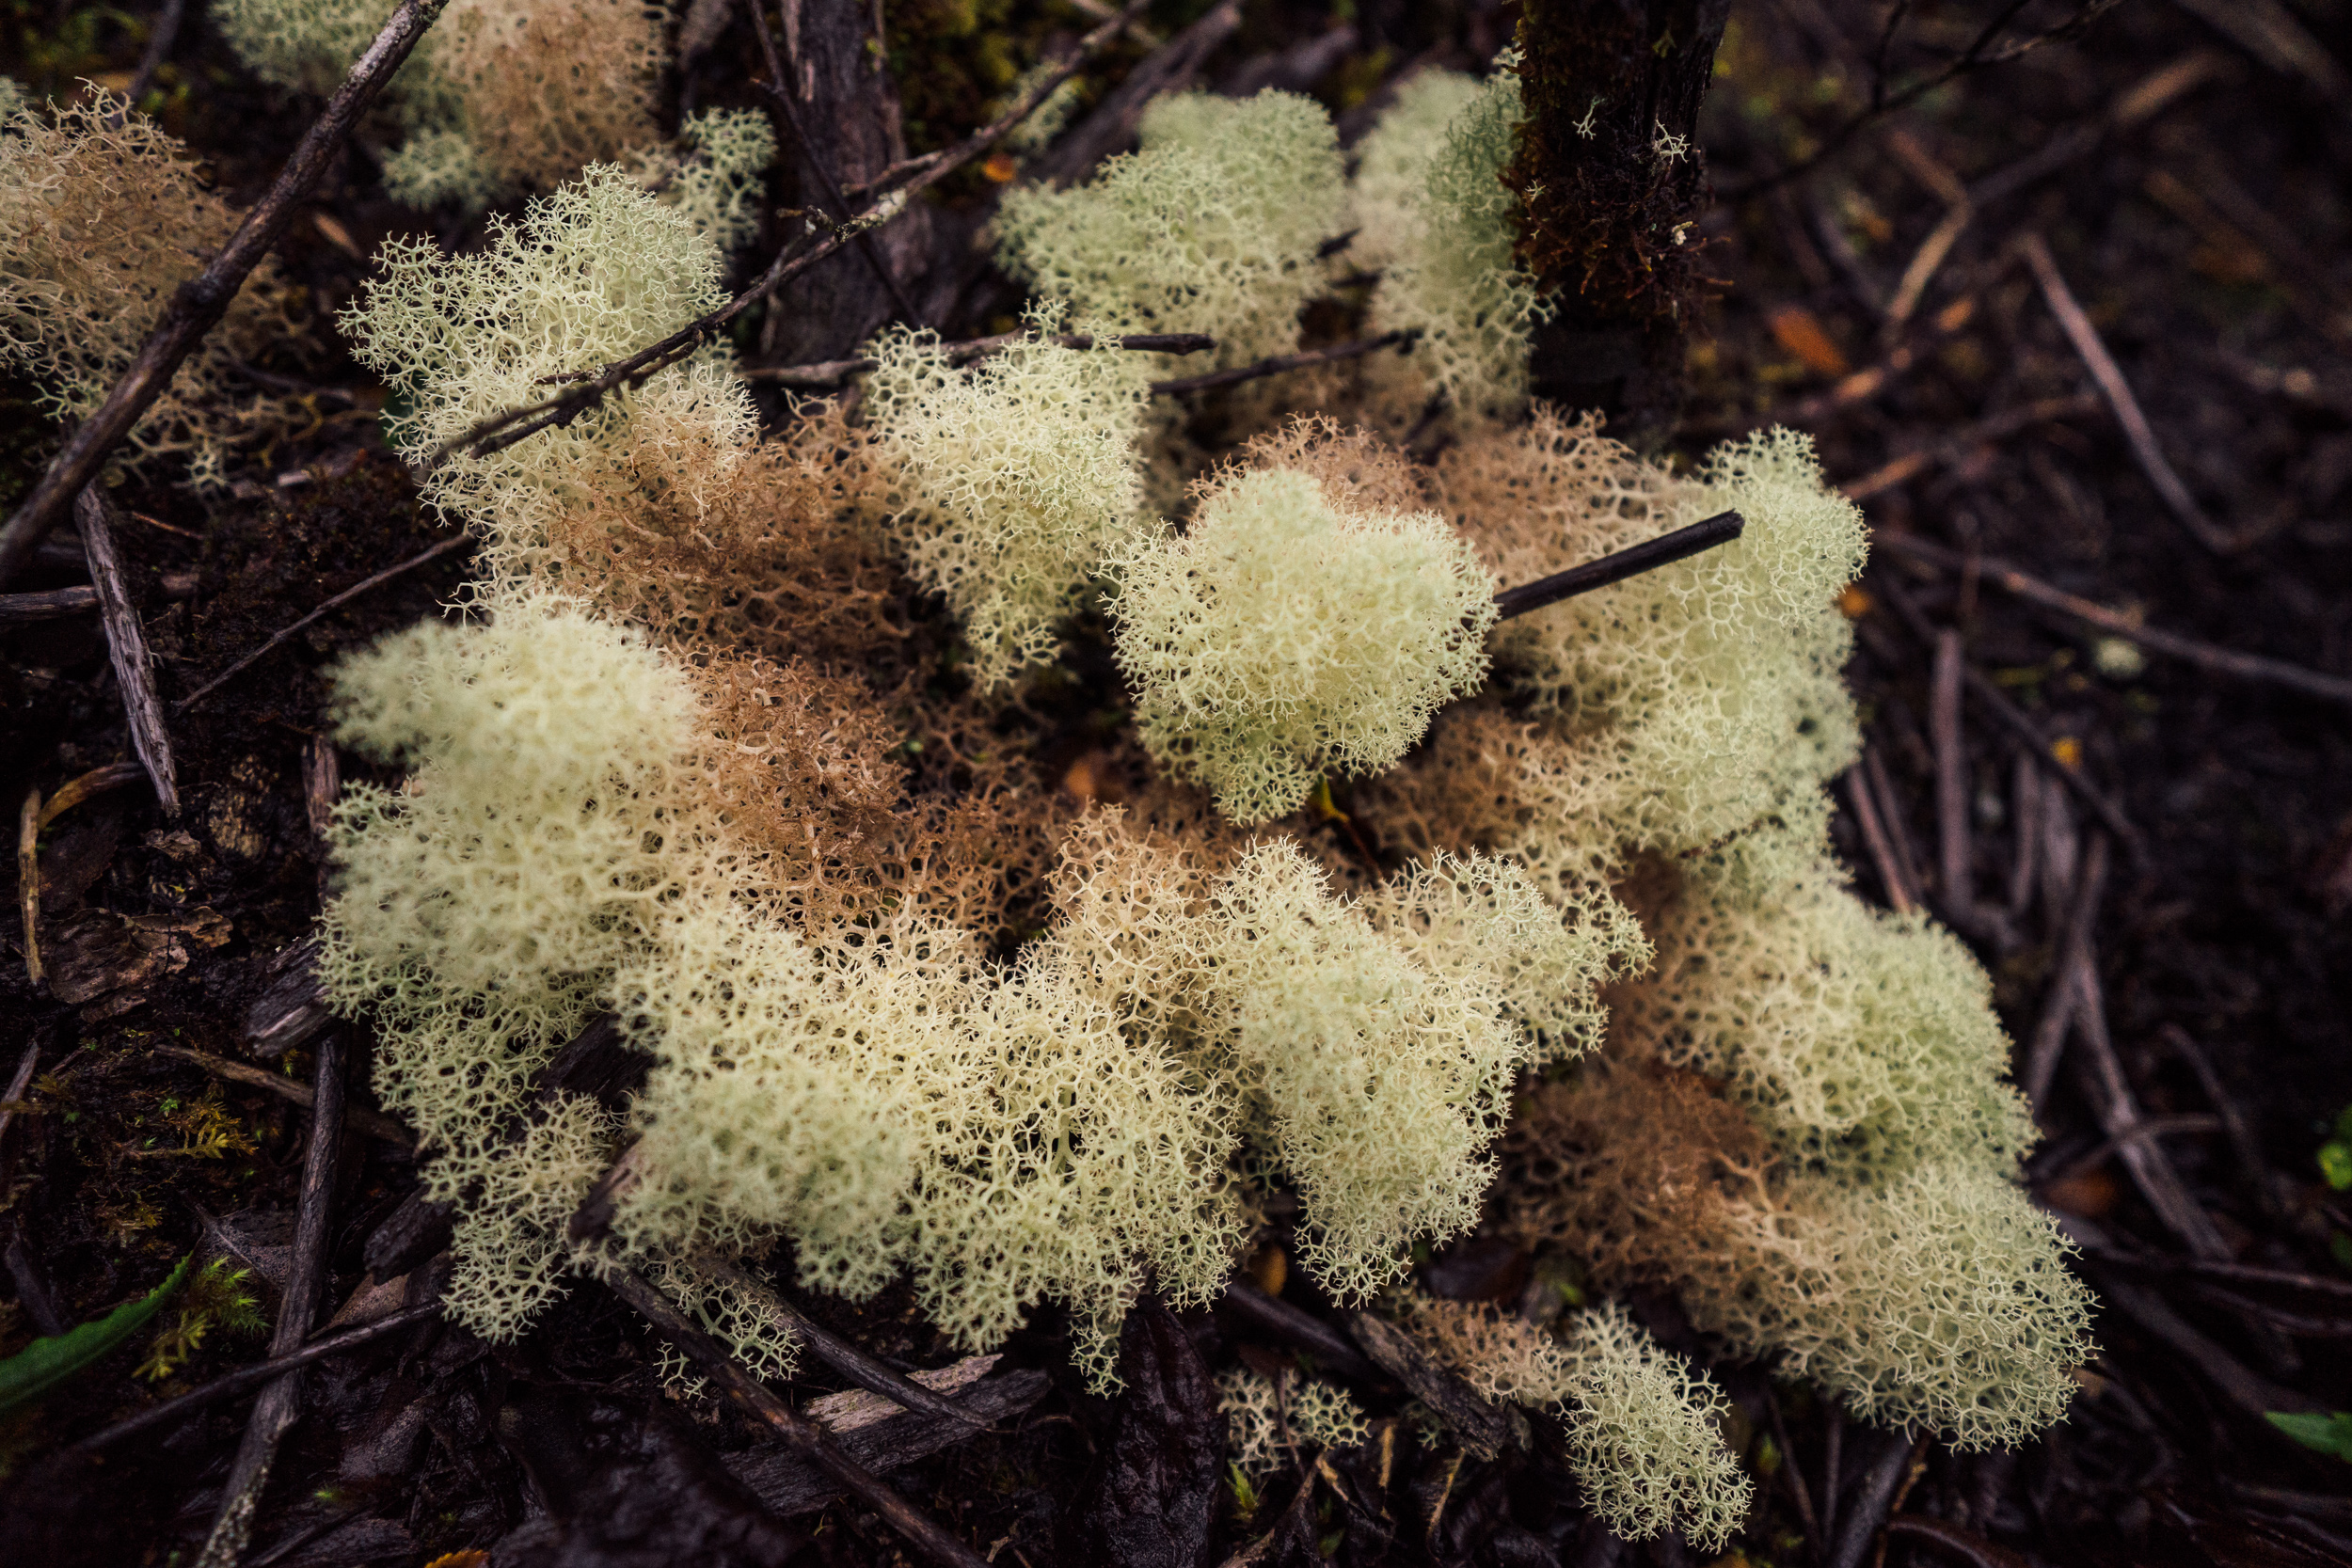 Some of the most incredible lichens